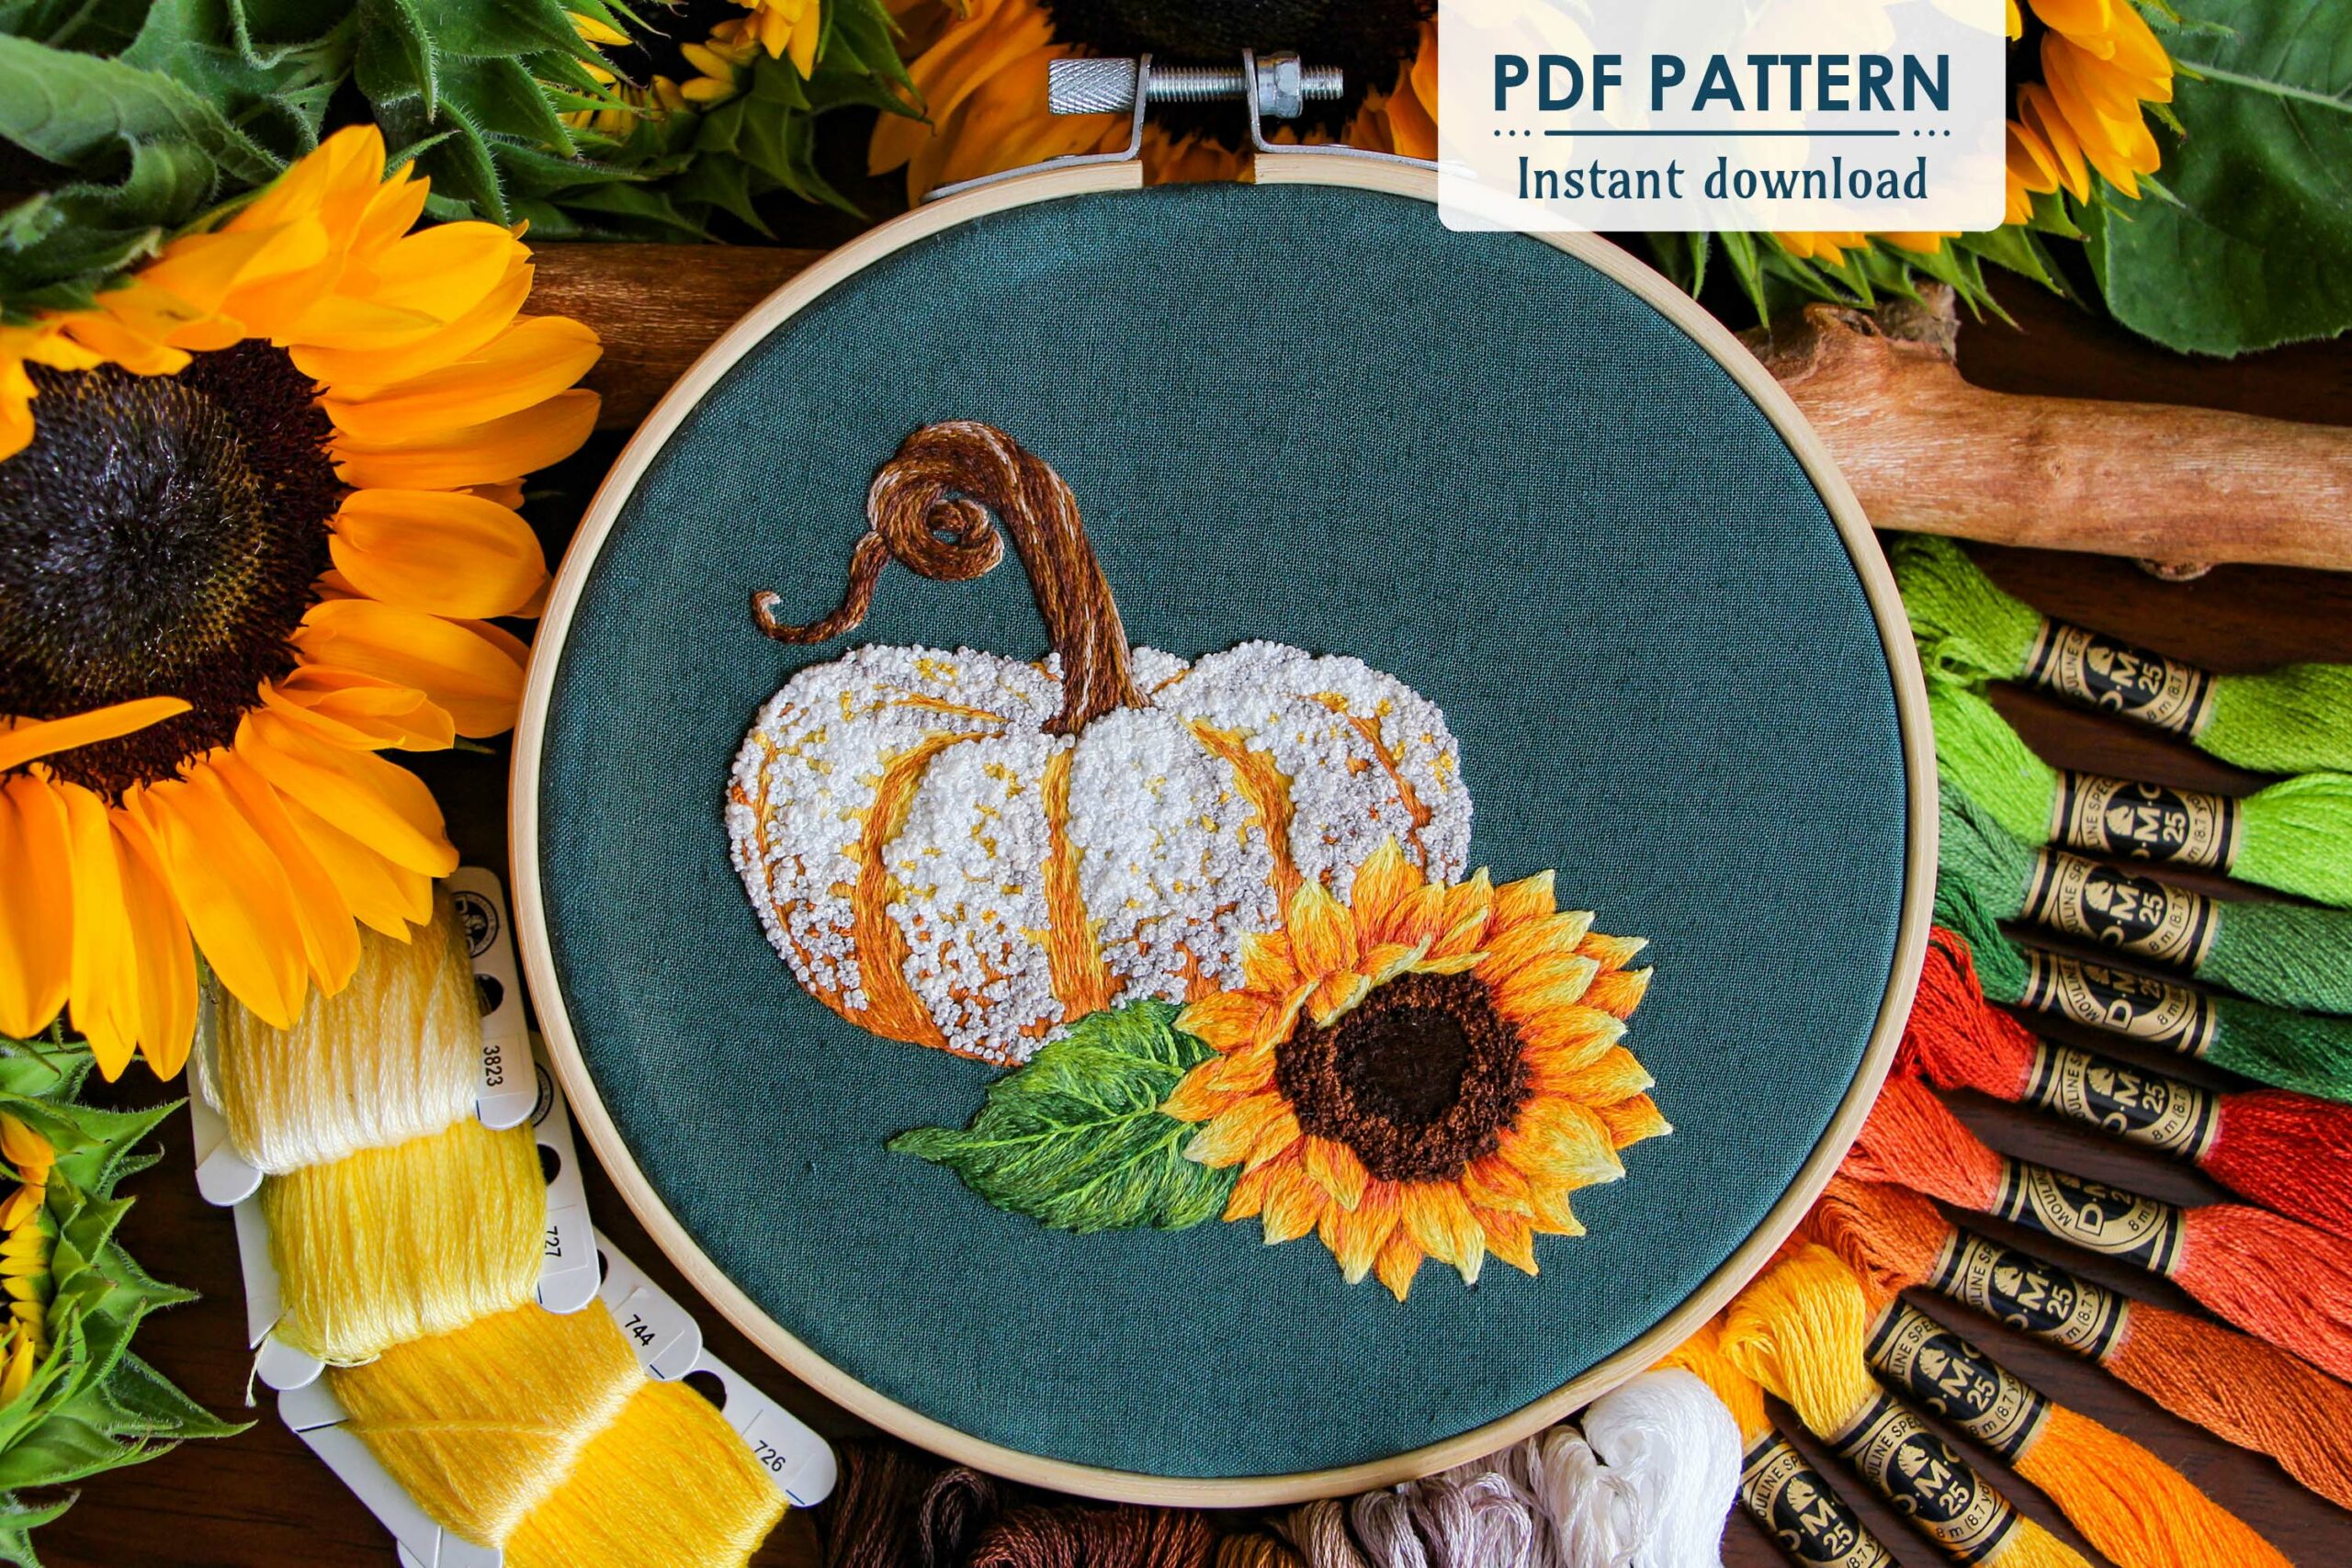 The finished hoop of the Autumn Spice Pumpkin embroidery features the thread painted pumpkin and sunflower. Surrounded by DMC thread colors and real sunflowers